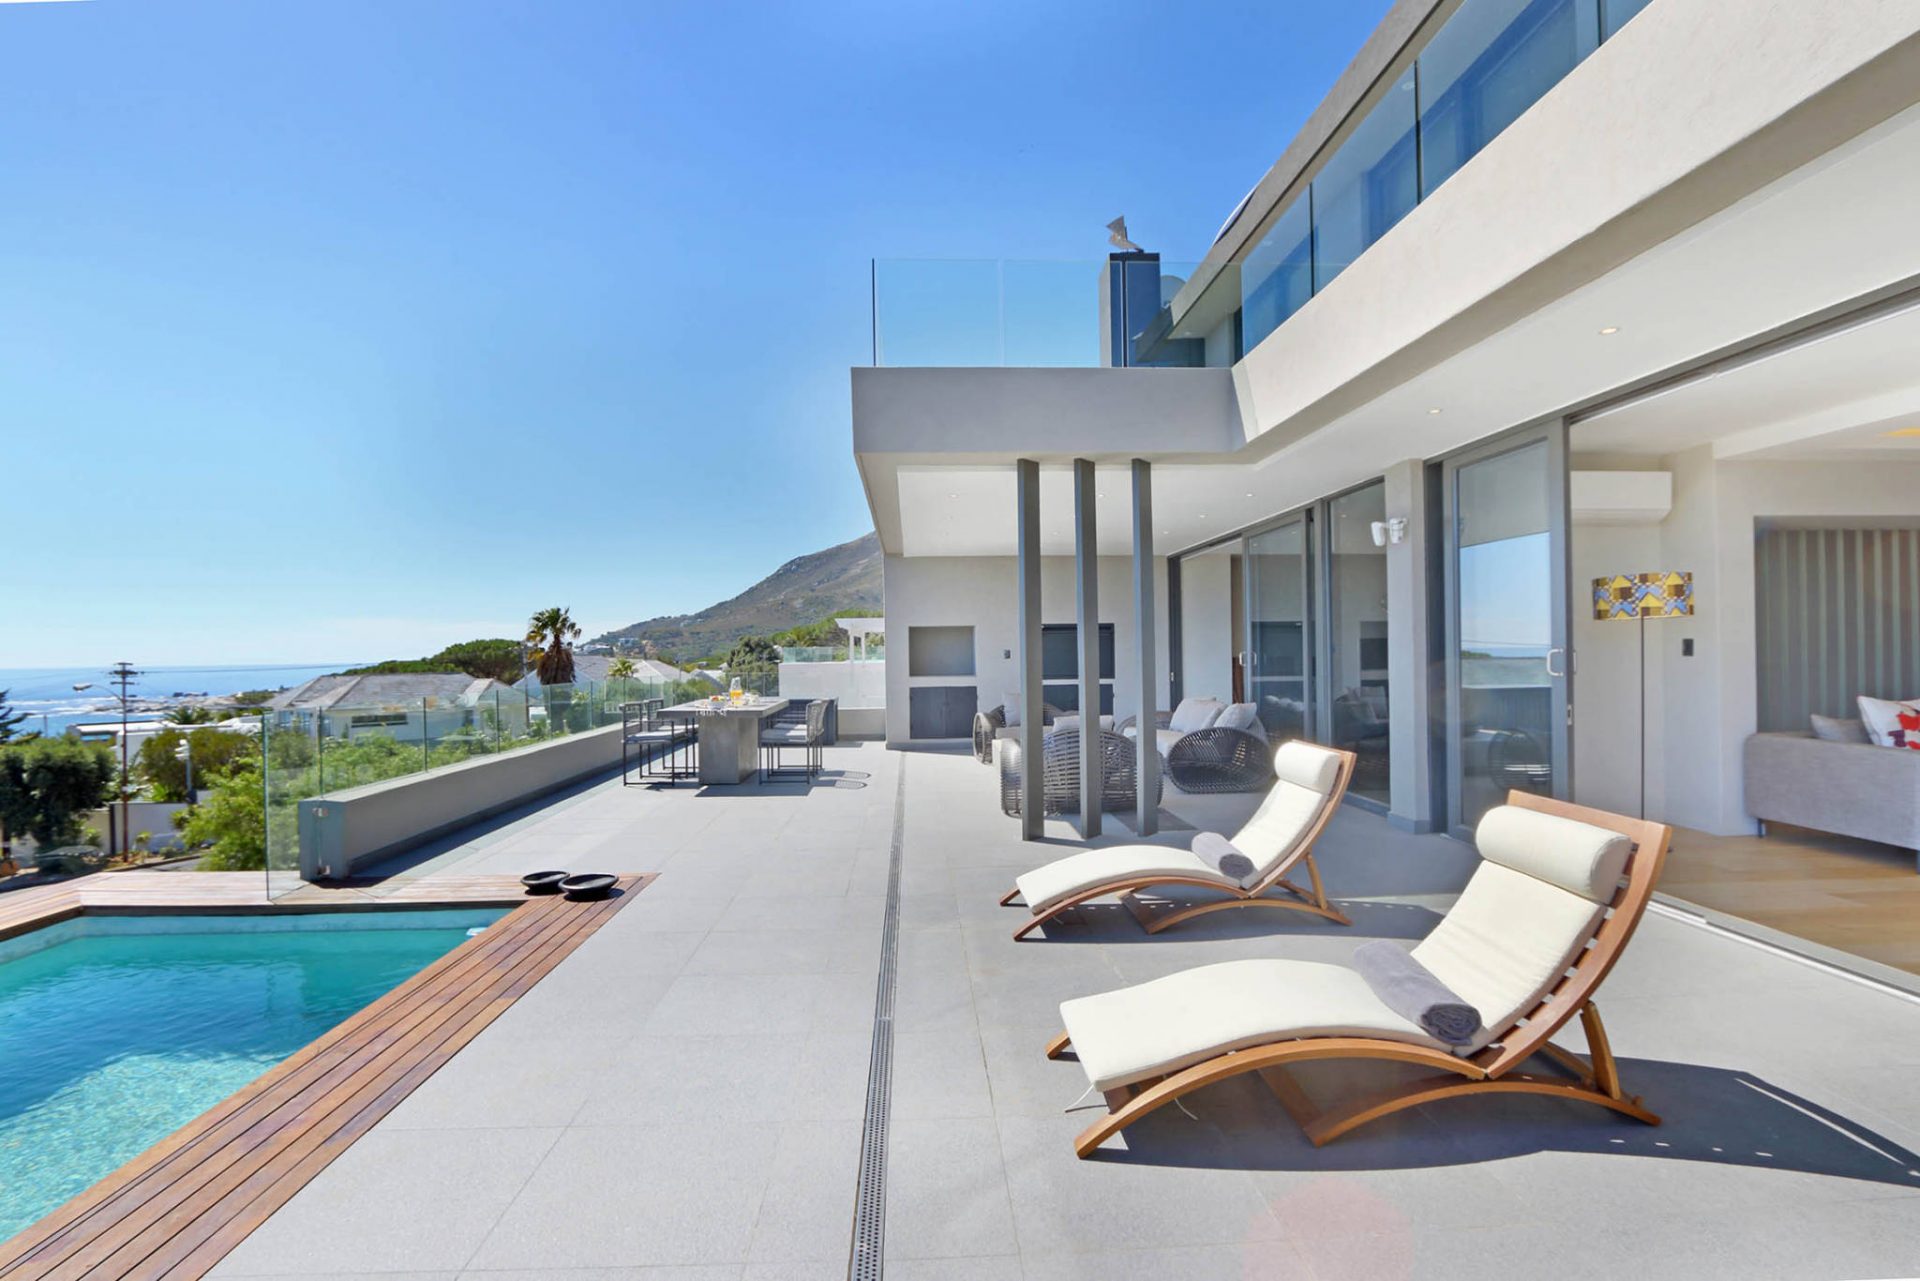 Photo 2 of 20 Finchley Villa accommodation in Camps Bay, Cape Town with 6 bedrooms and 5 bathrooms